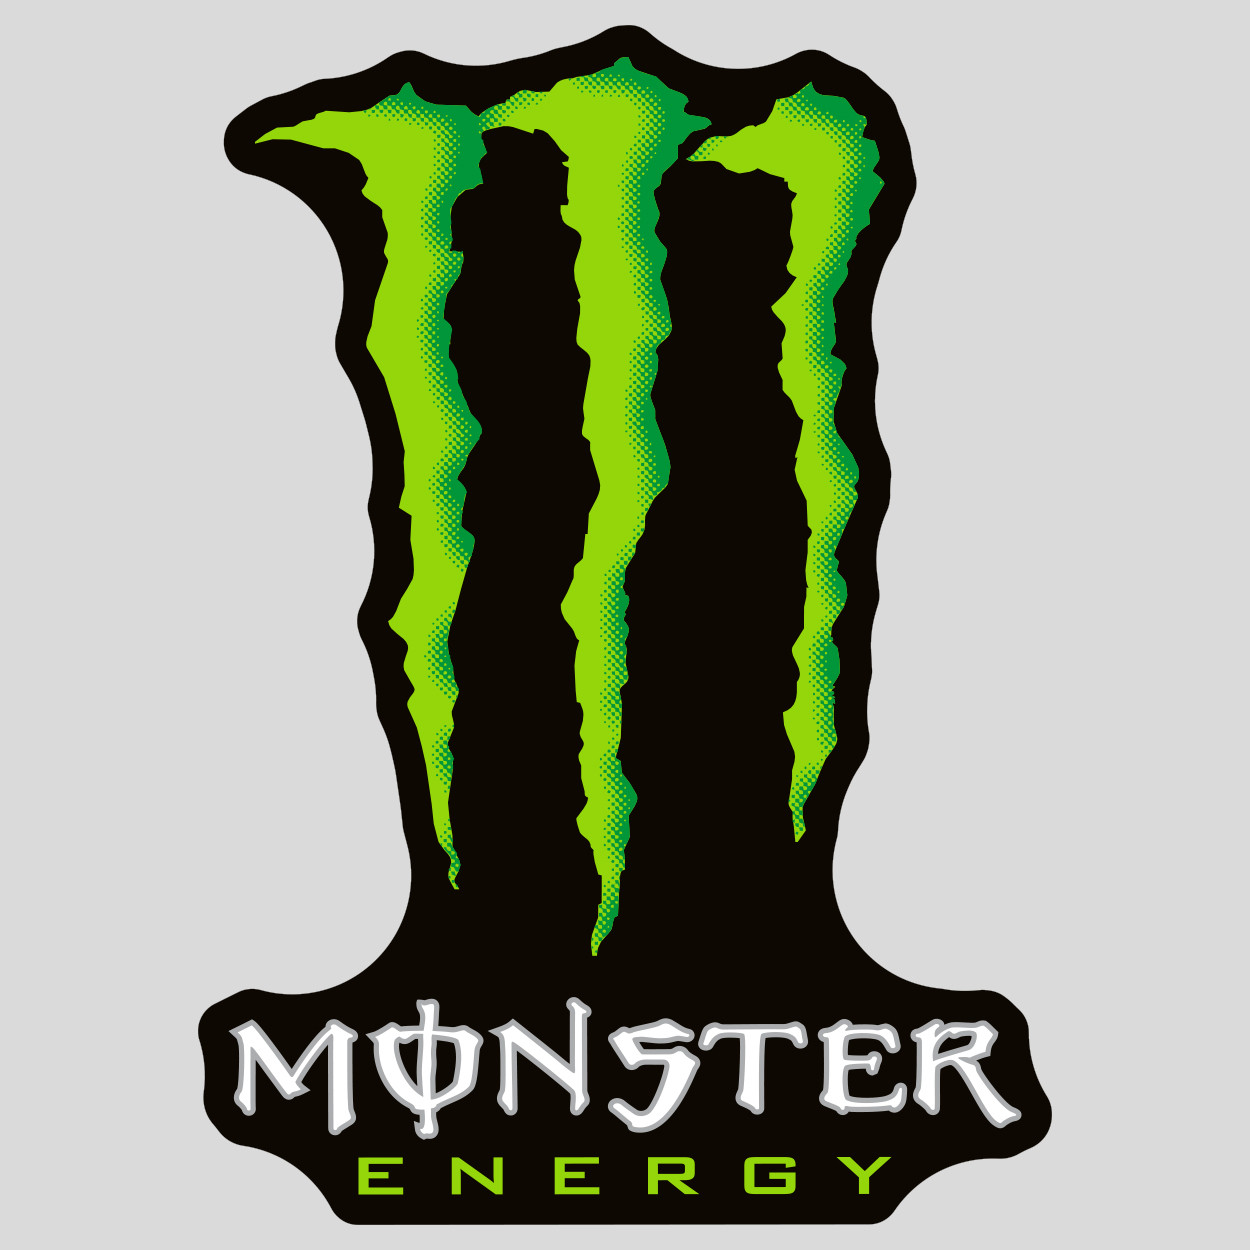 Sticker Monster Energy - Achat neuf ou d'occasion pas cher